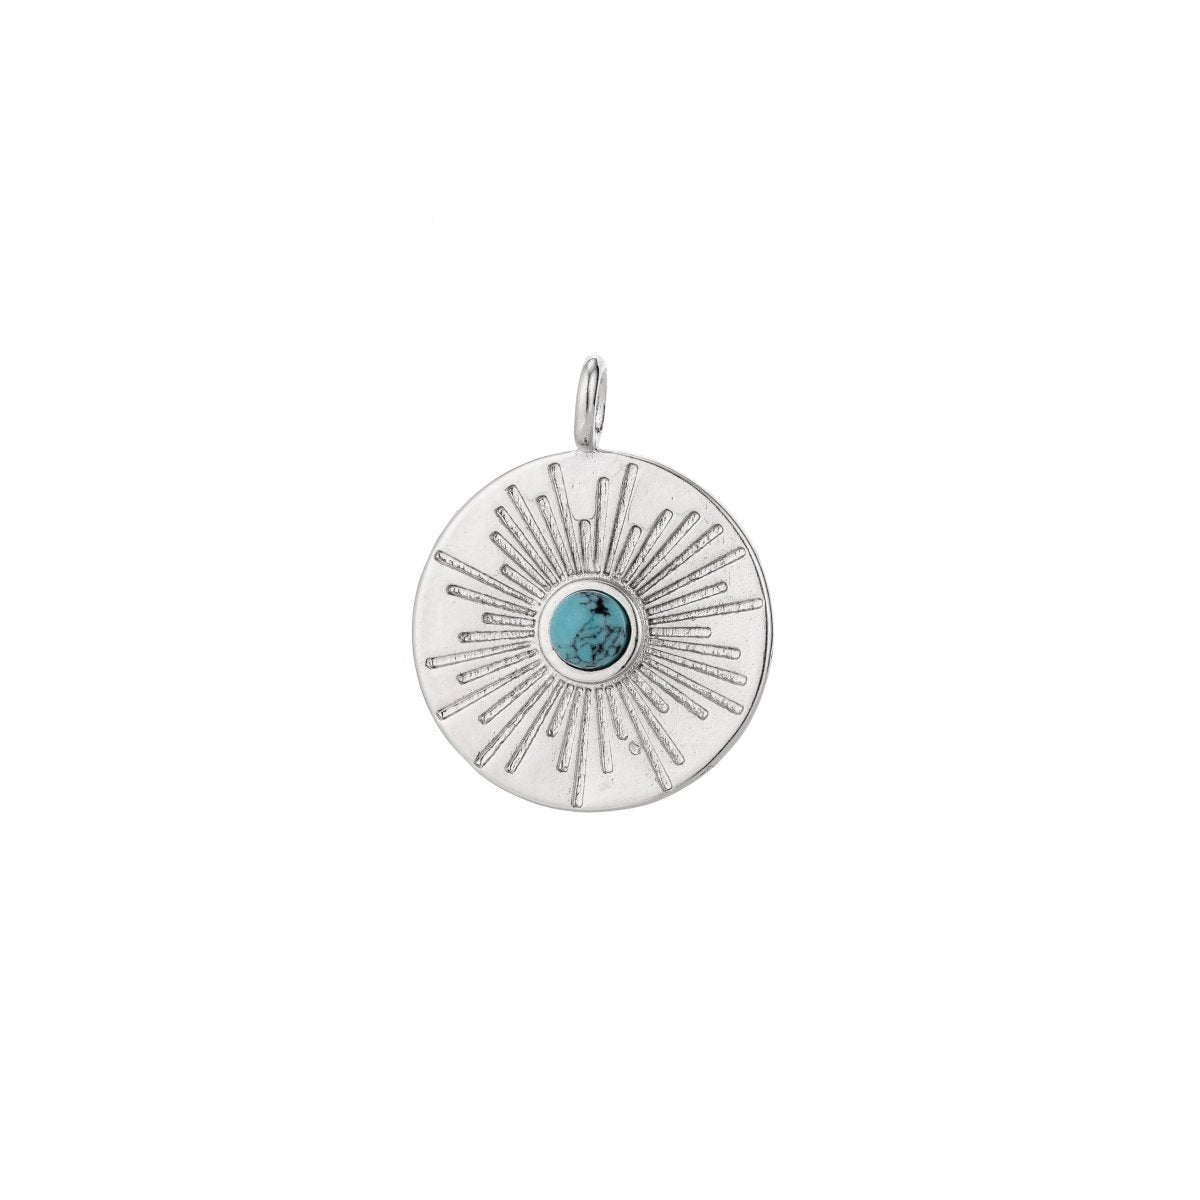 Dainty 18K Gold Filled / White Gold Sun Sunburst Coin Charm Turquoise / White Howlite Charm for Earring Necklace Jewelry Making Supplies C-271 C-272 C-303 D-778 - DLUXCA